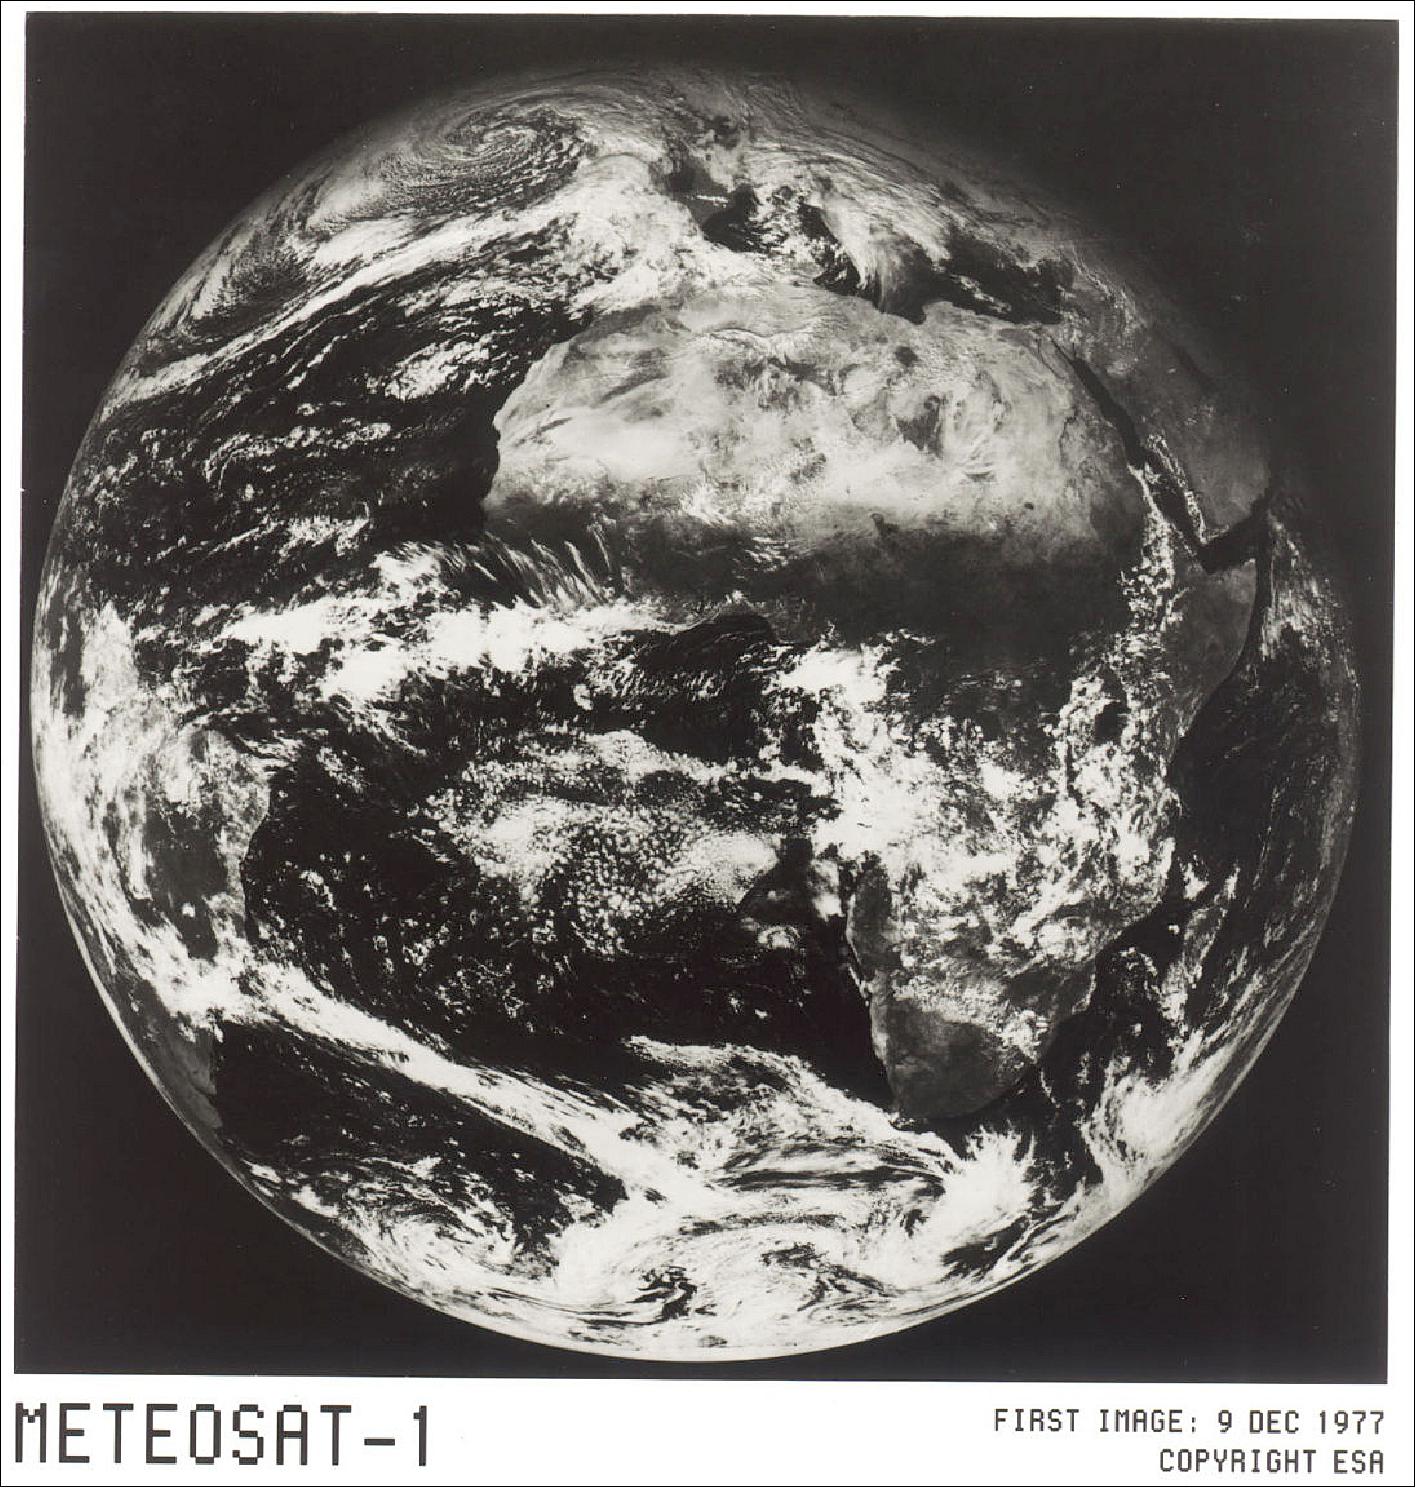 Figure 8: Meteosat-1 was launched on a Delta rocket from Cape Canaveral and moved to its nominal operational location over the equator at 0º longitude. The check-out of all systems was followed within a month by the start of routine image acquisition and distribution. This immediately became part of the operational system for weather forecasting across many countries in Europe (image credit: ESA)